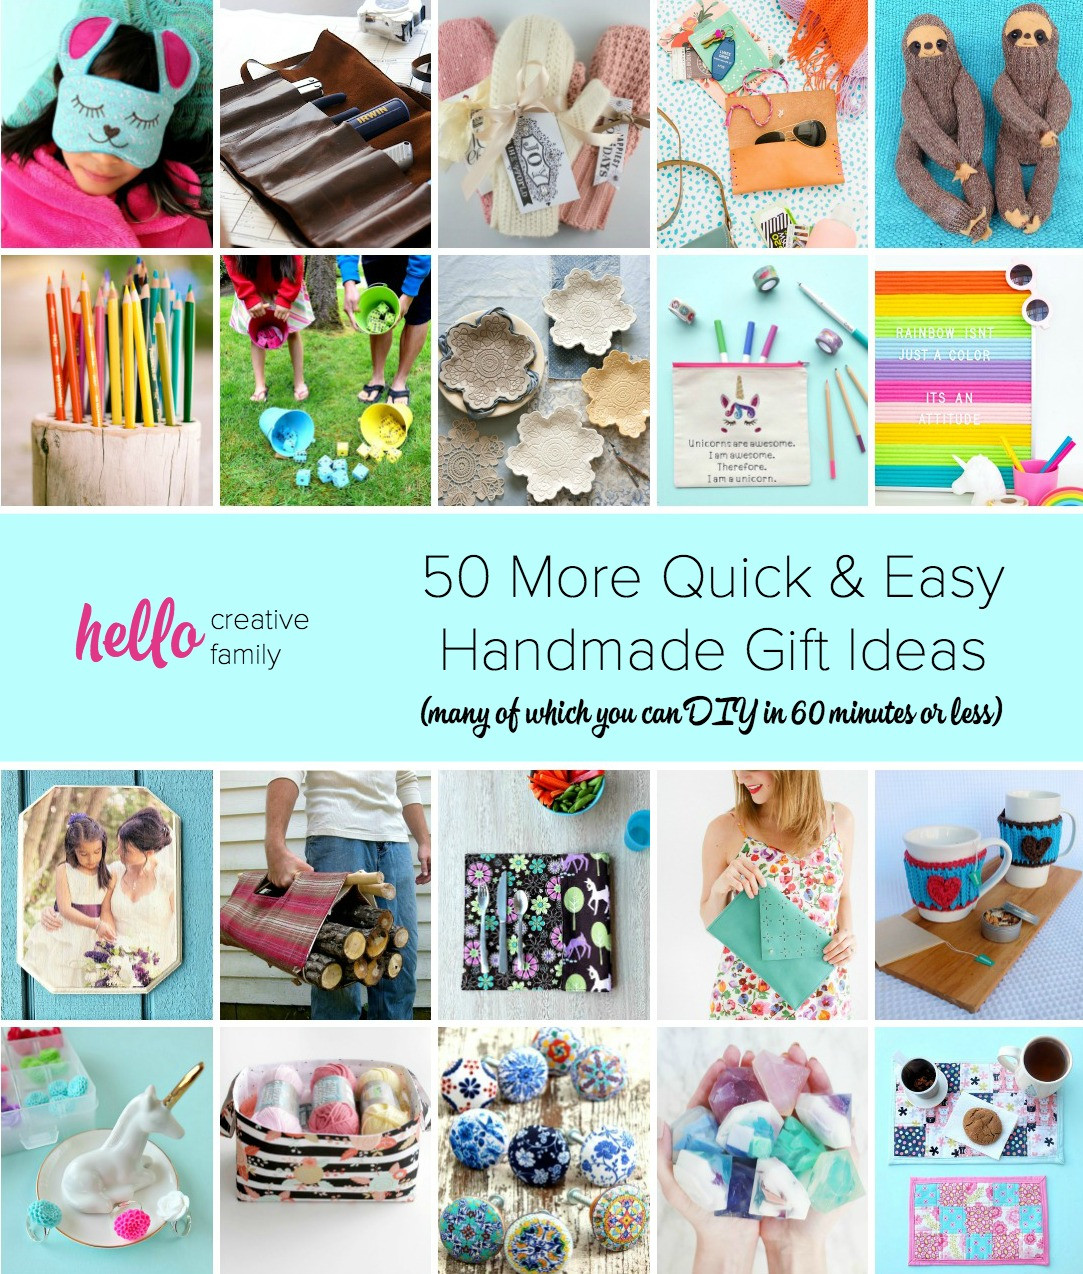 Handmade Birthday Gift Ideas
 50 More Quick and Easy Handmade Gift Ideas 1 hour or less